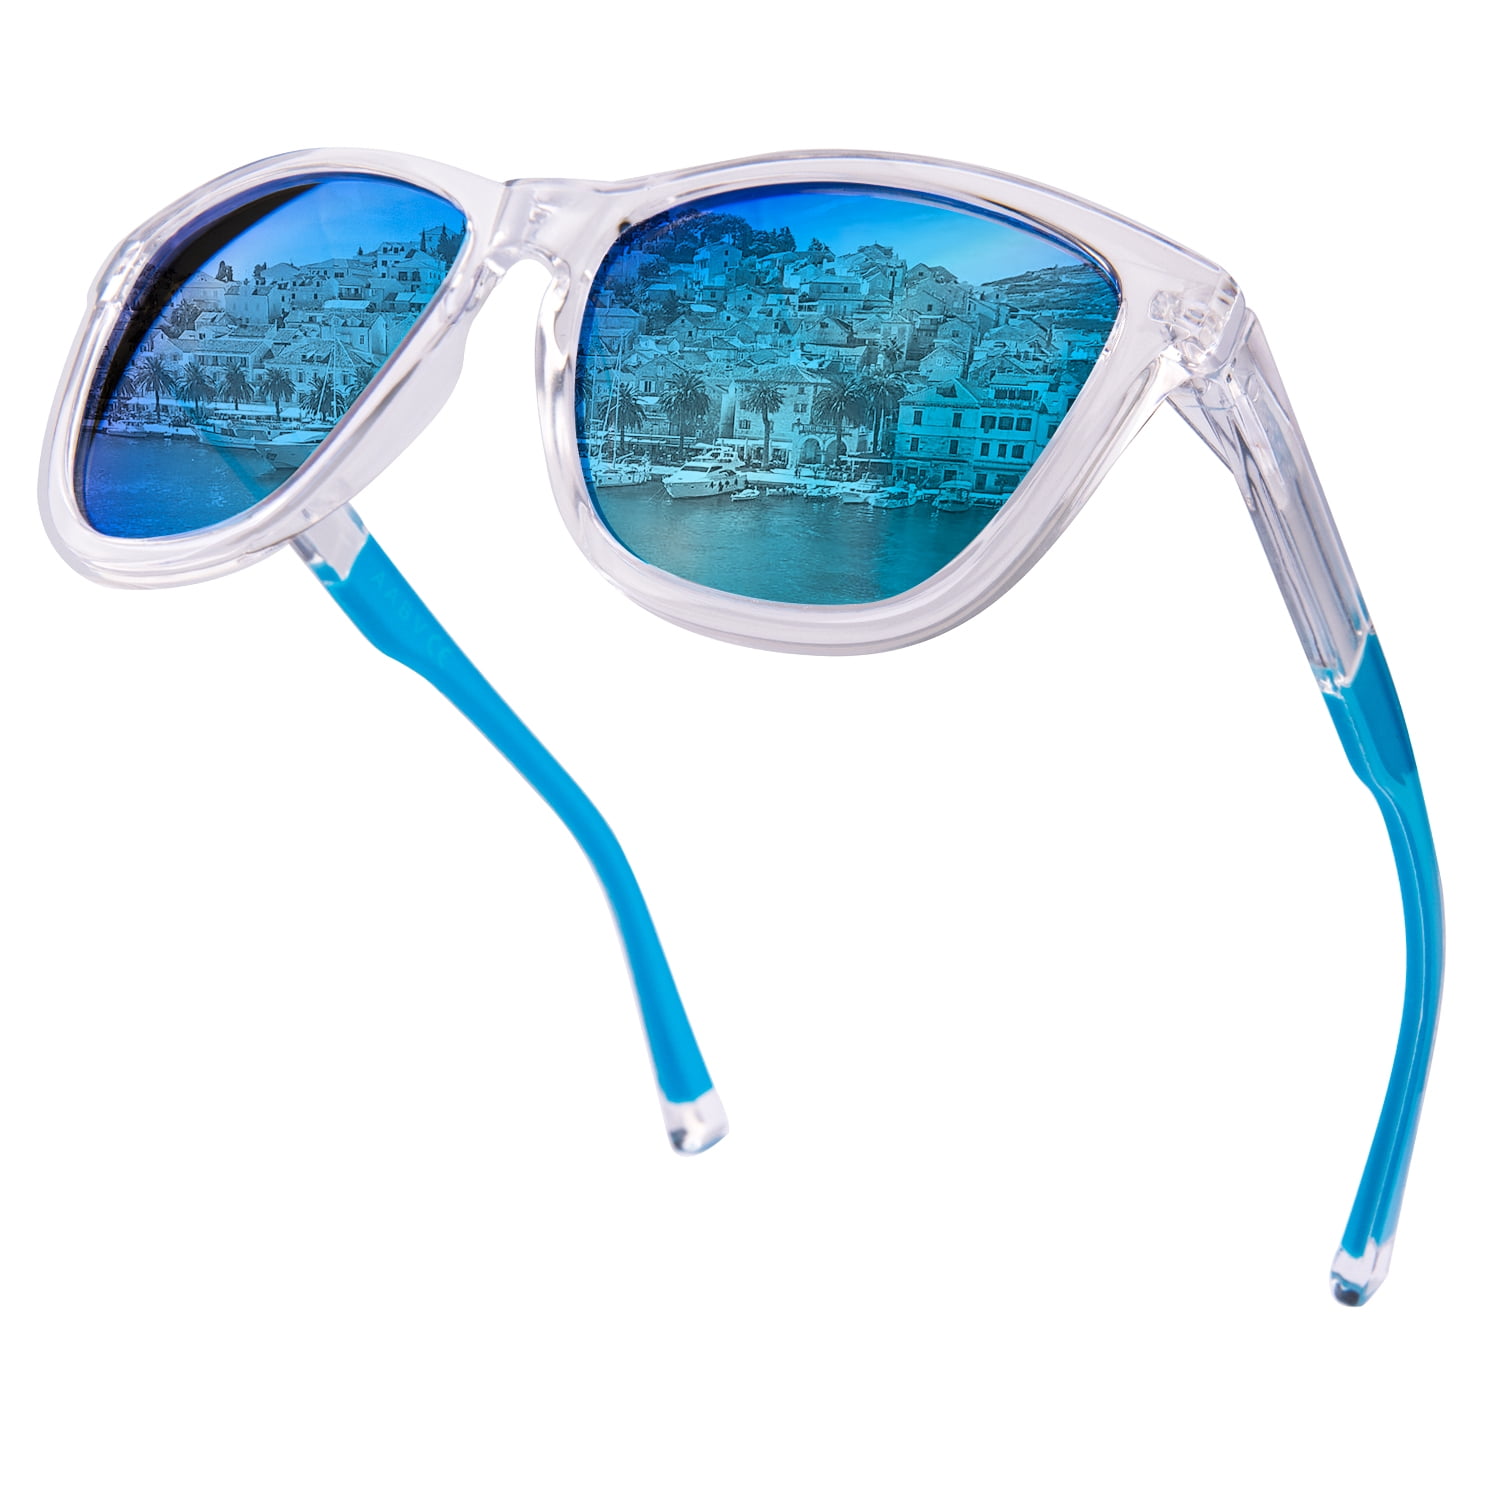 AABV Square Polarized Sunglasses, Translucent Frame Colorful Neon